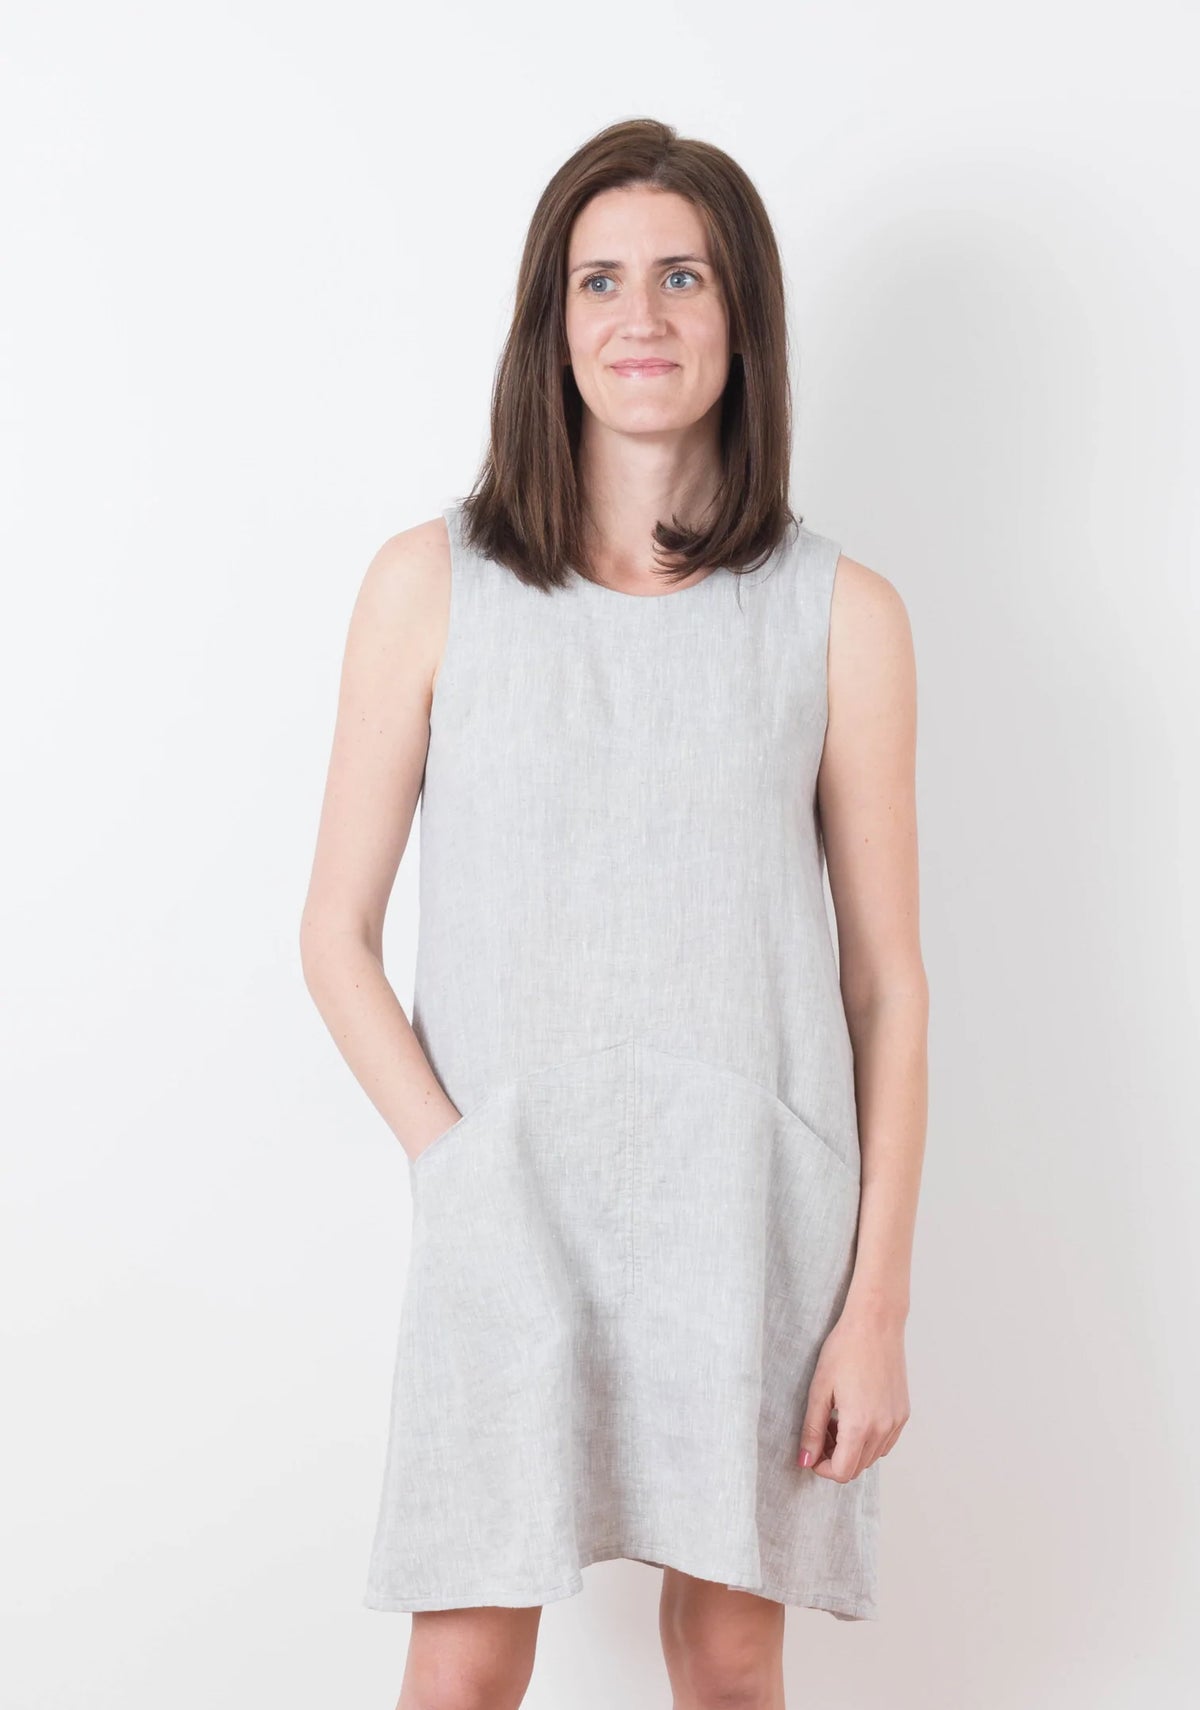 Model Kari is wearing a size 6 Farrow in a light colored linen fabric, front view sleeveless with pockets.